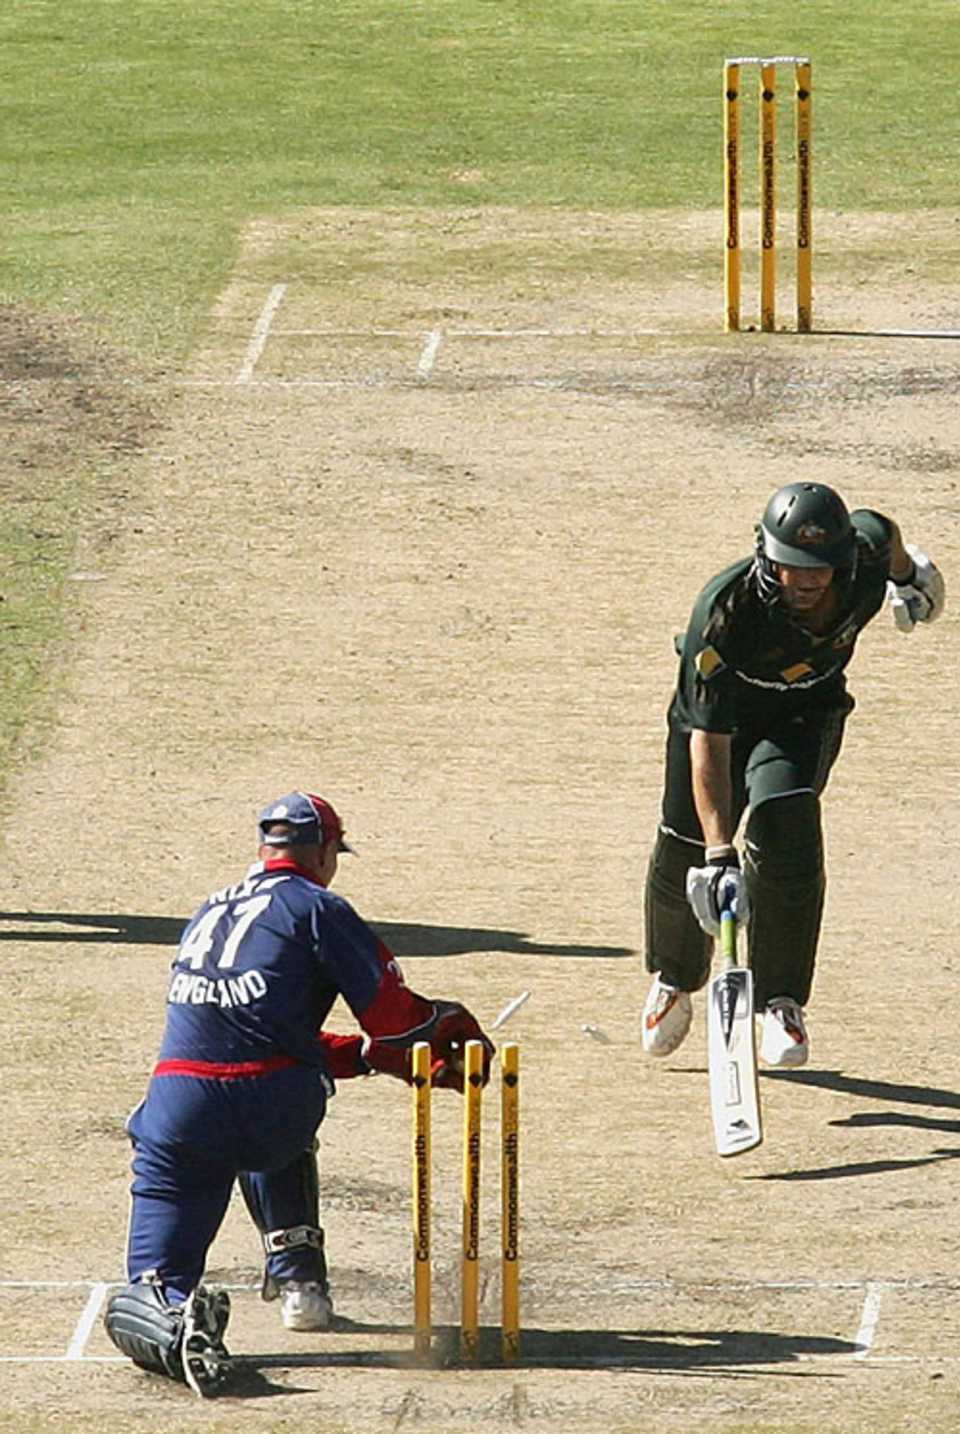 Adam Gilchrist is run out by Paul Nixon